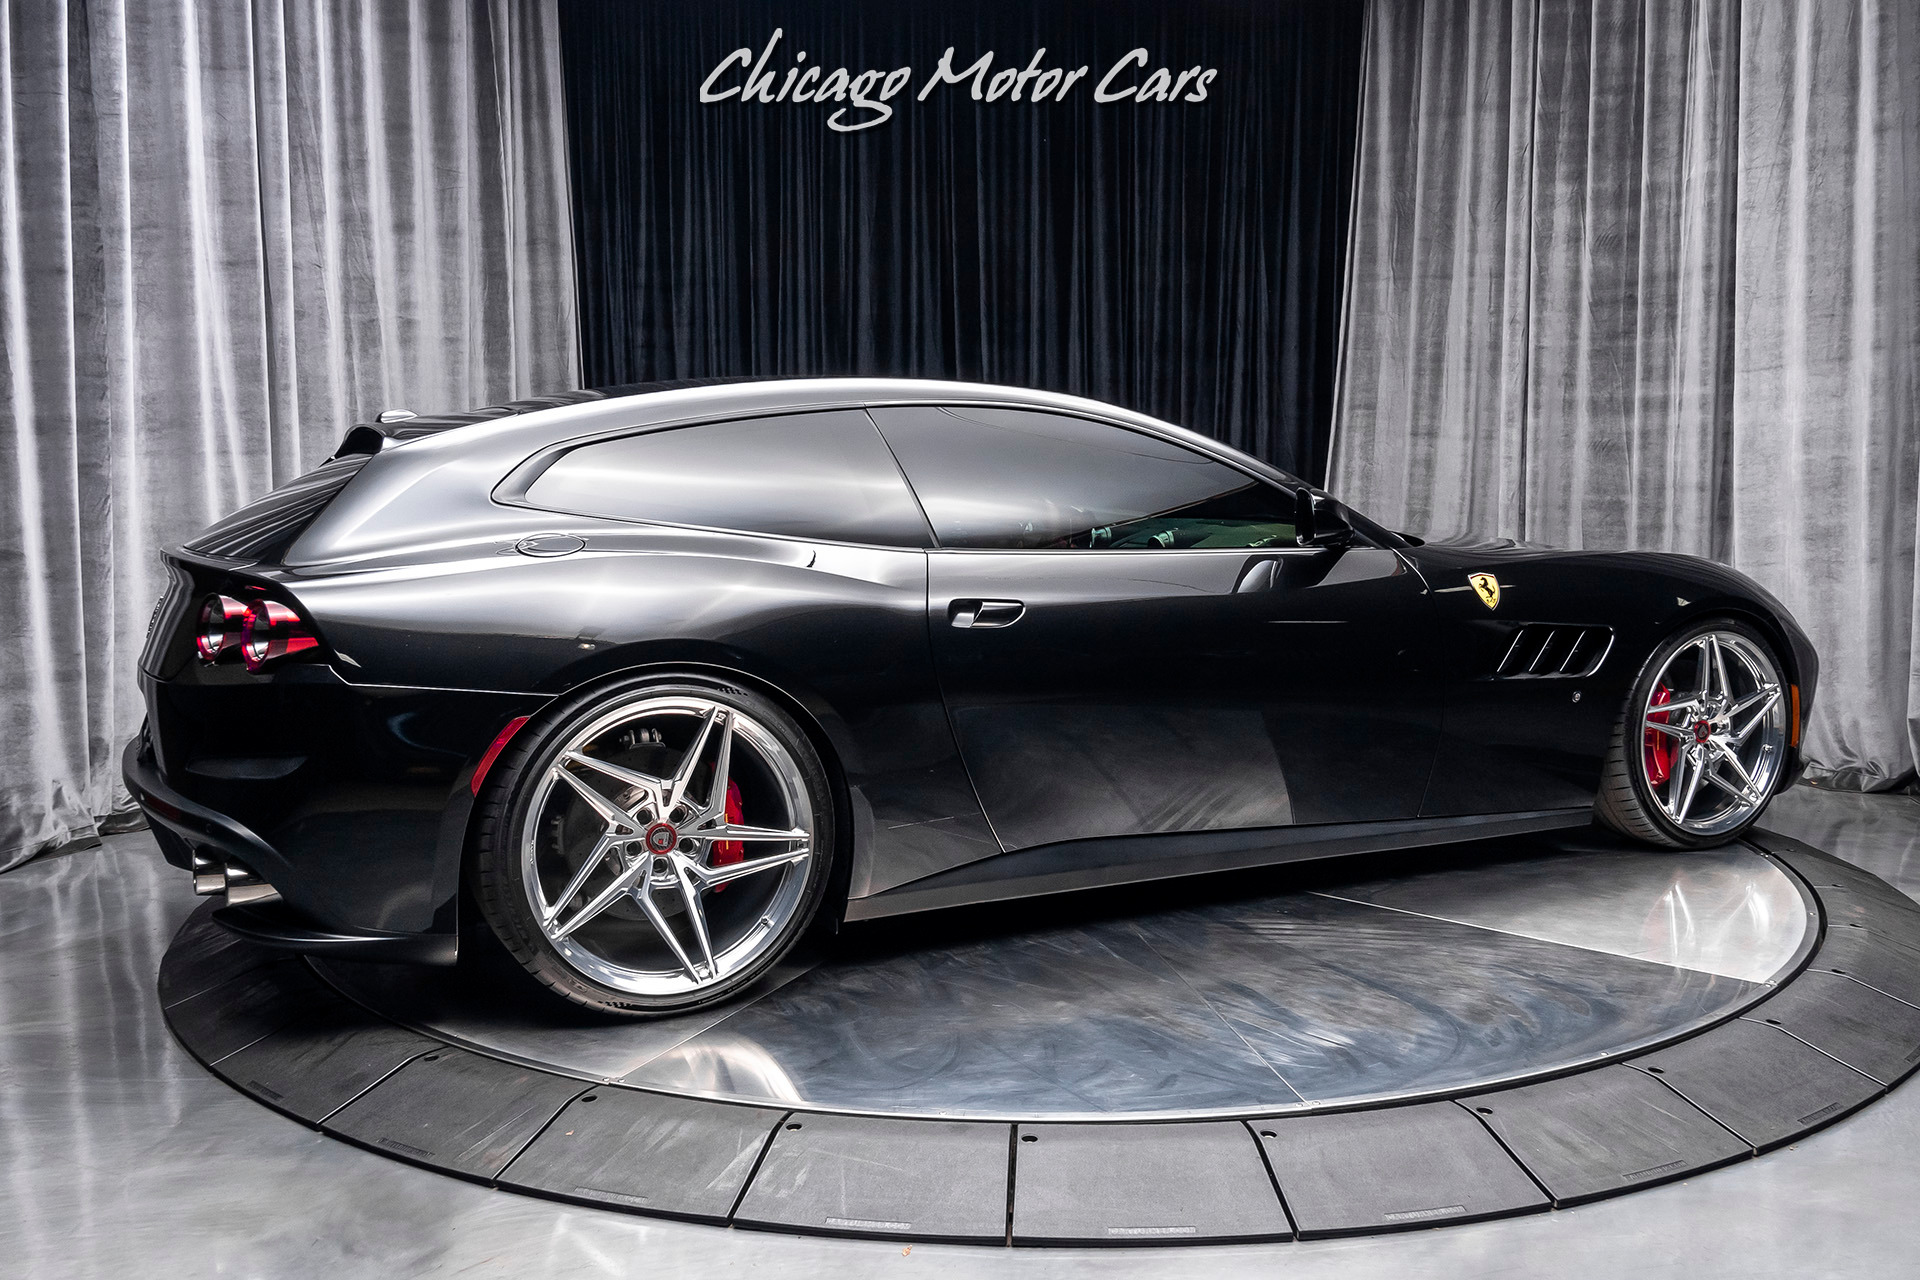 Used-2018-Ferrari-GTC4Lusso-T-Only-9400-Miles-Highly-Optioned-UPGRADES